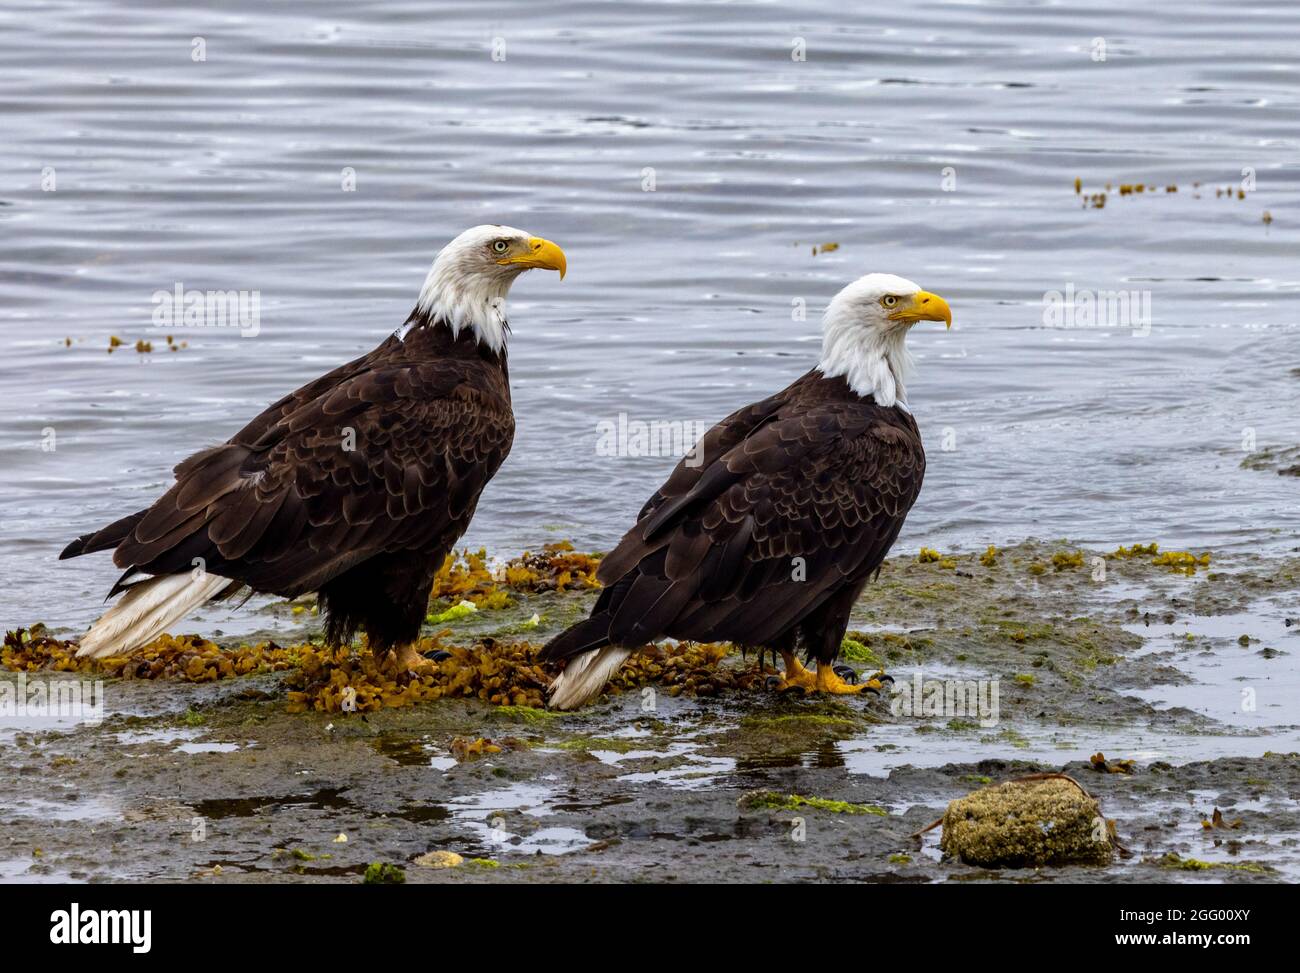 Two mature American Bald Eagles on shore at low tide,, Port Hardy, Vancouver Island, BC, Canada Stock Photo